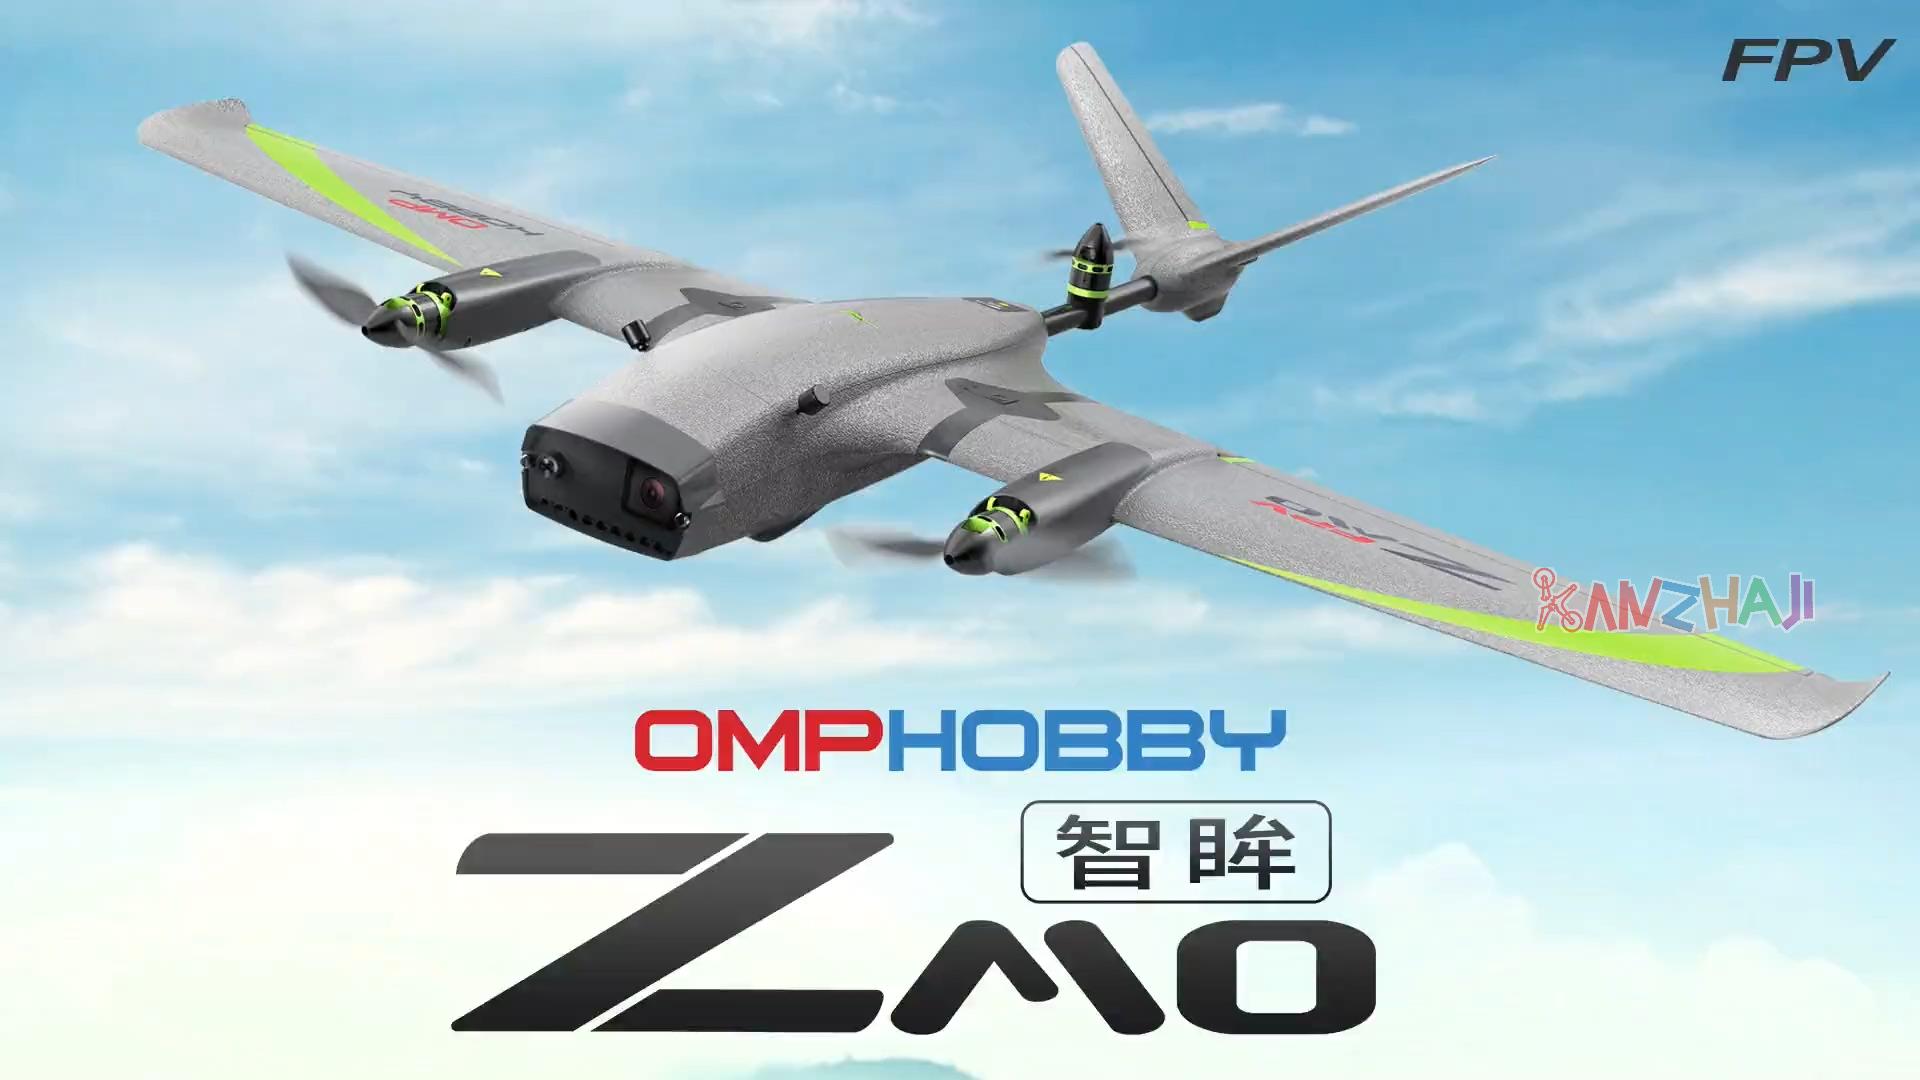 OMPHOBBY ZMO 潮玩无人机， 第一视角体验